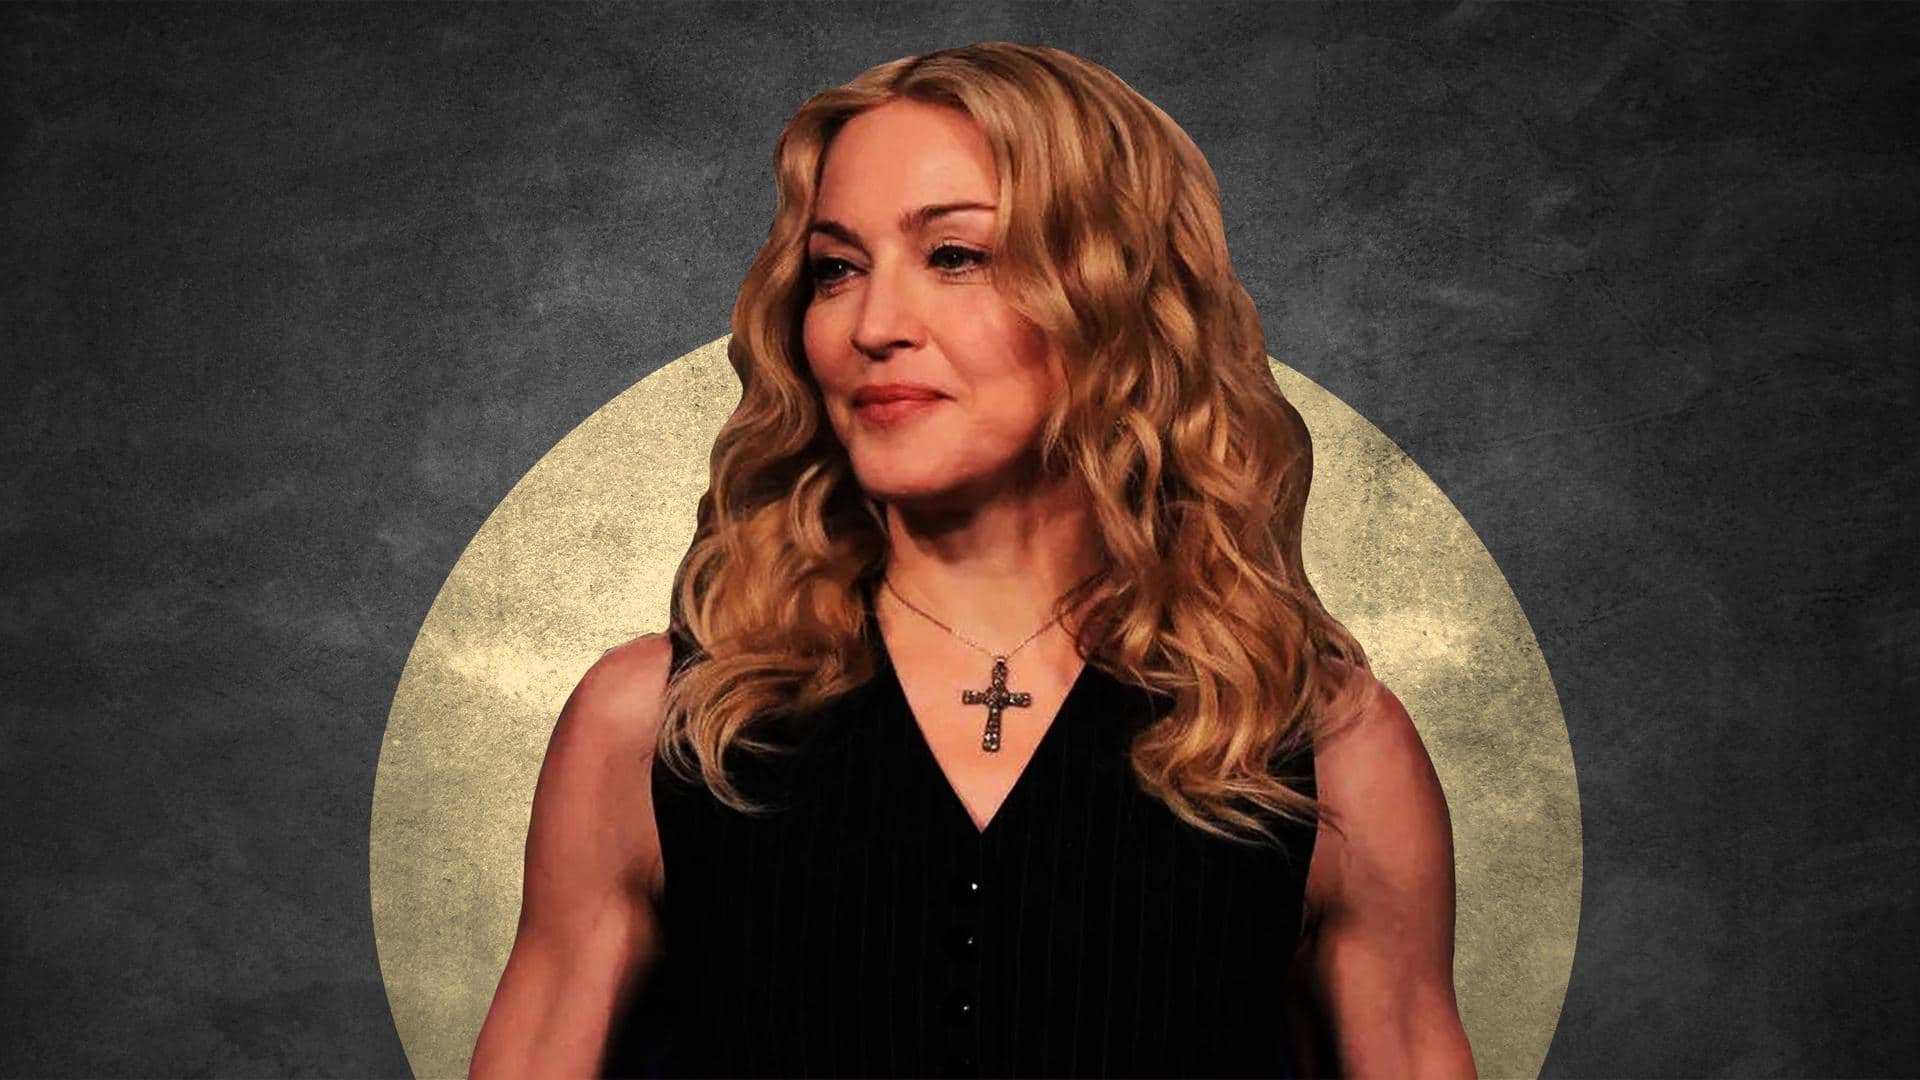 Madonna hospitalized due to 'serious bacterial infection'; tour rescheduled  